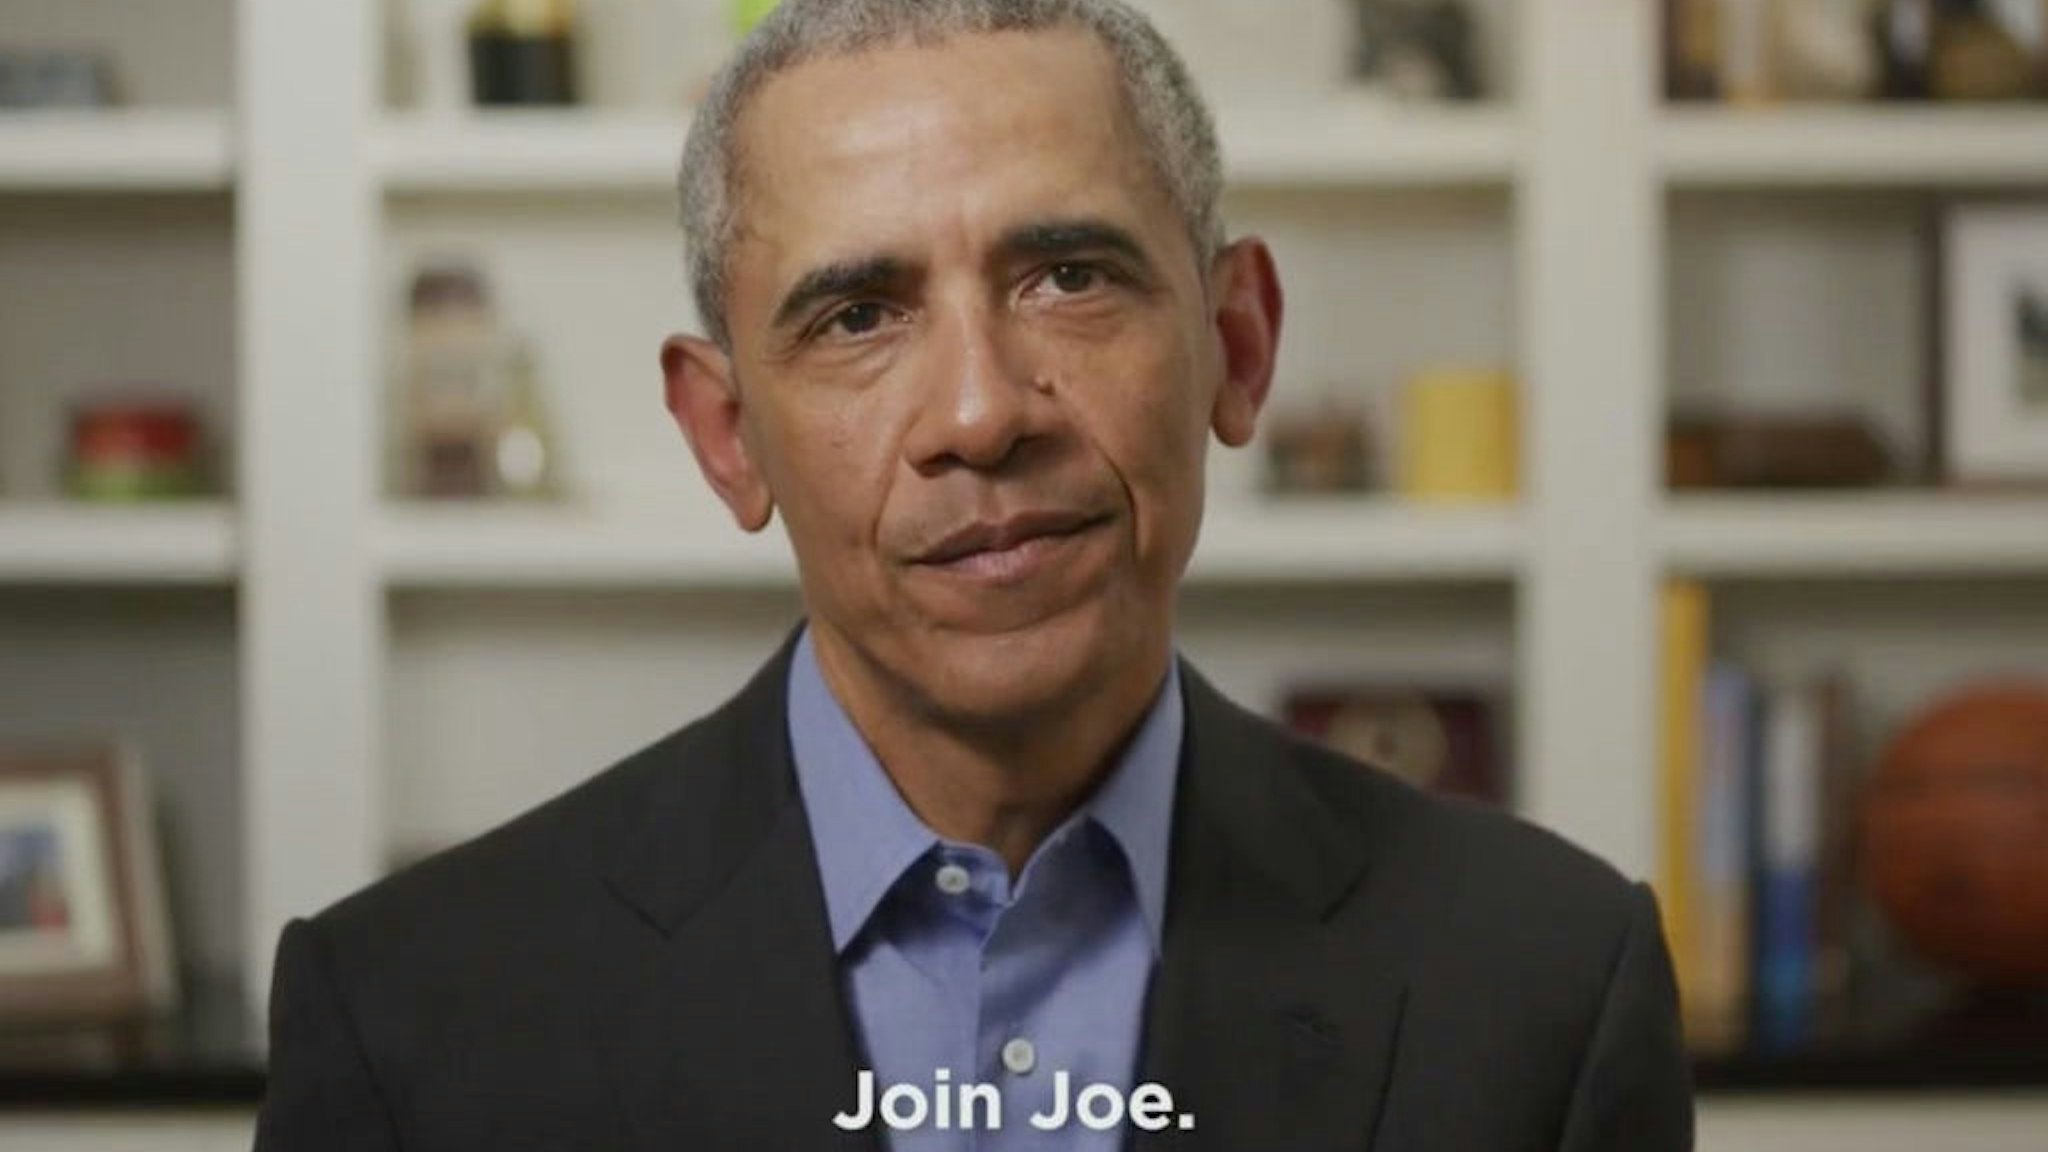 In this screengrab taken from Twitter.com, former U.S. President Barack Obama endorses Democratic presidential candidate former Vice President Joe Biden during a video released on April 14, 2020. (Via Getty Images)